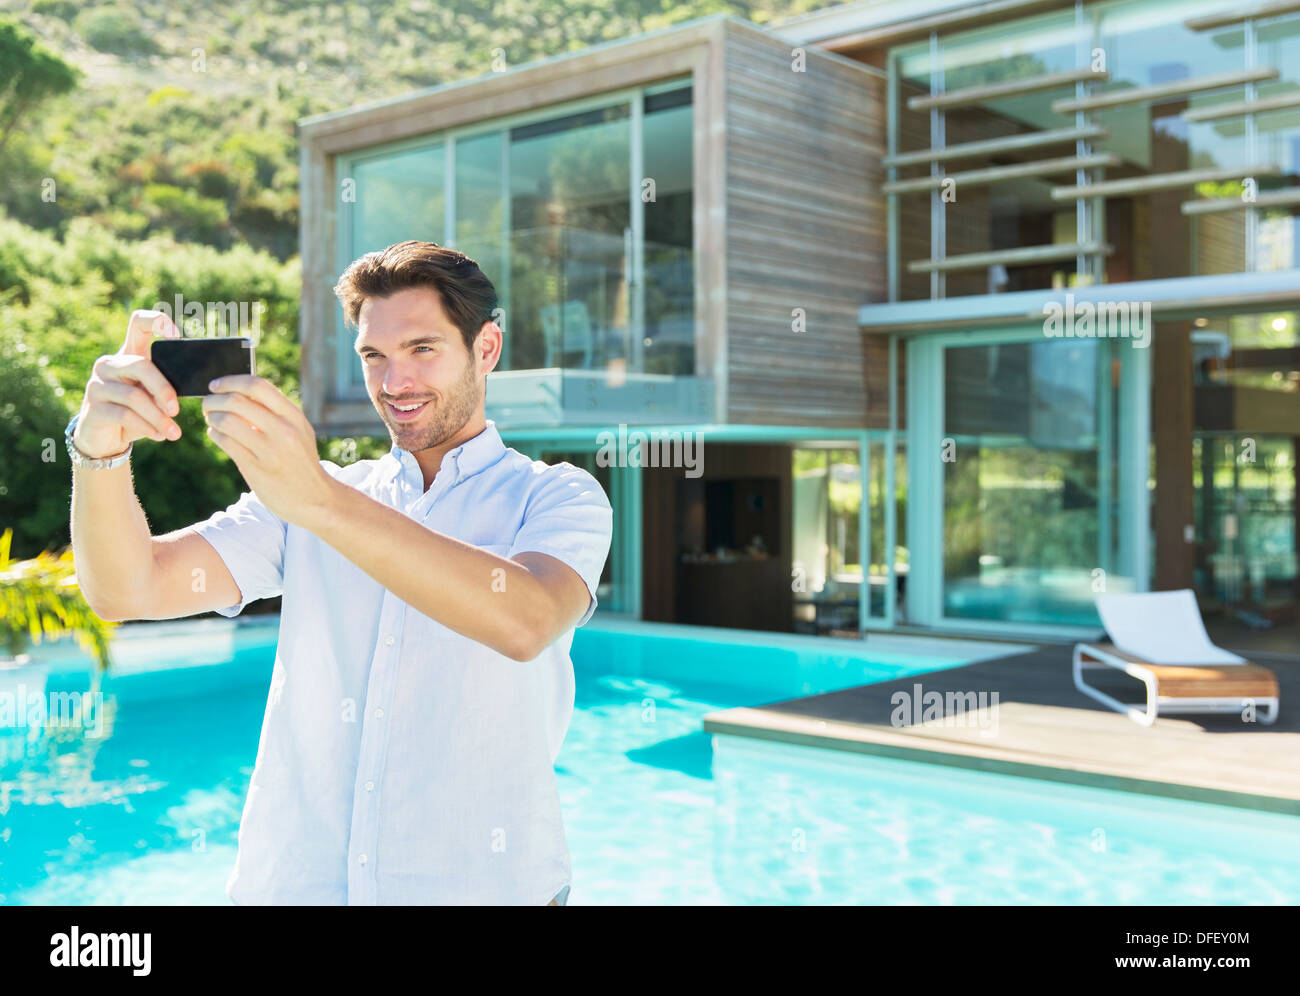 Man taking self-portrait with camera phone at poolside Banque D'Images